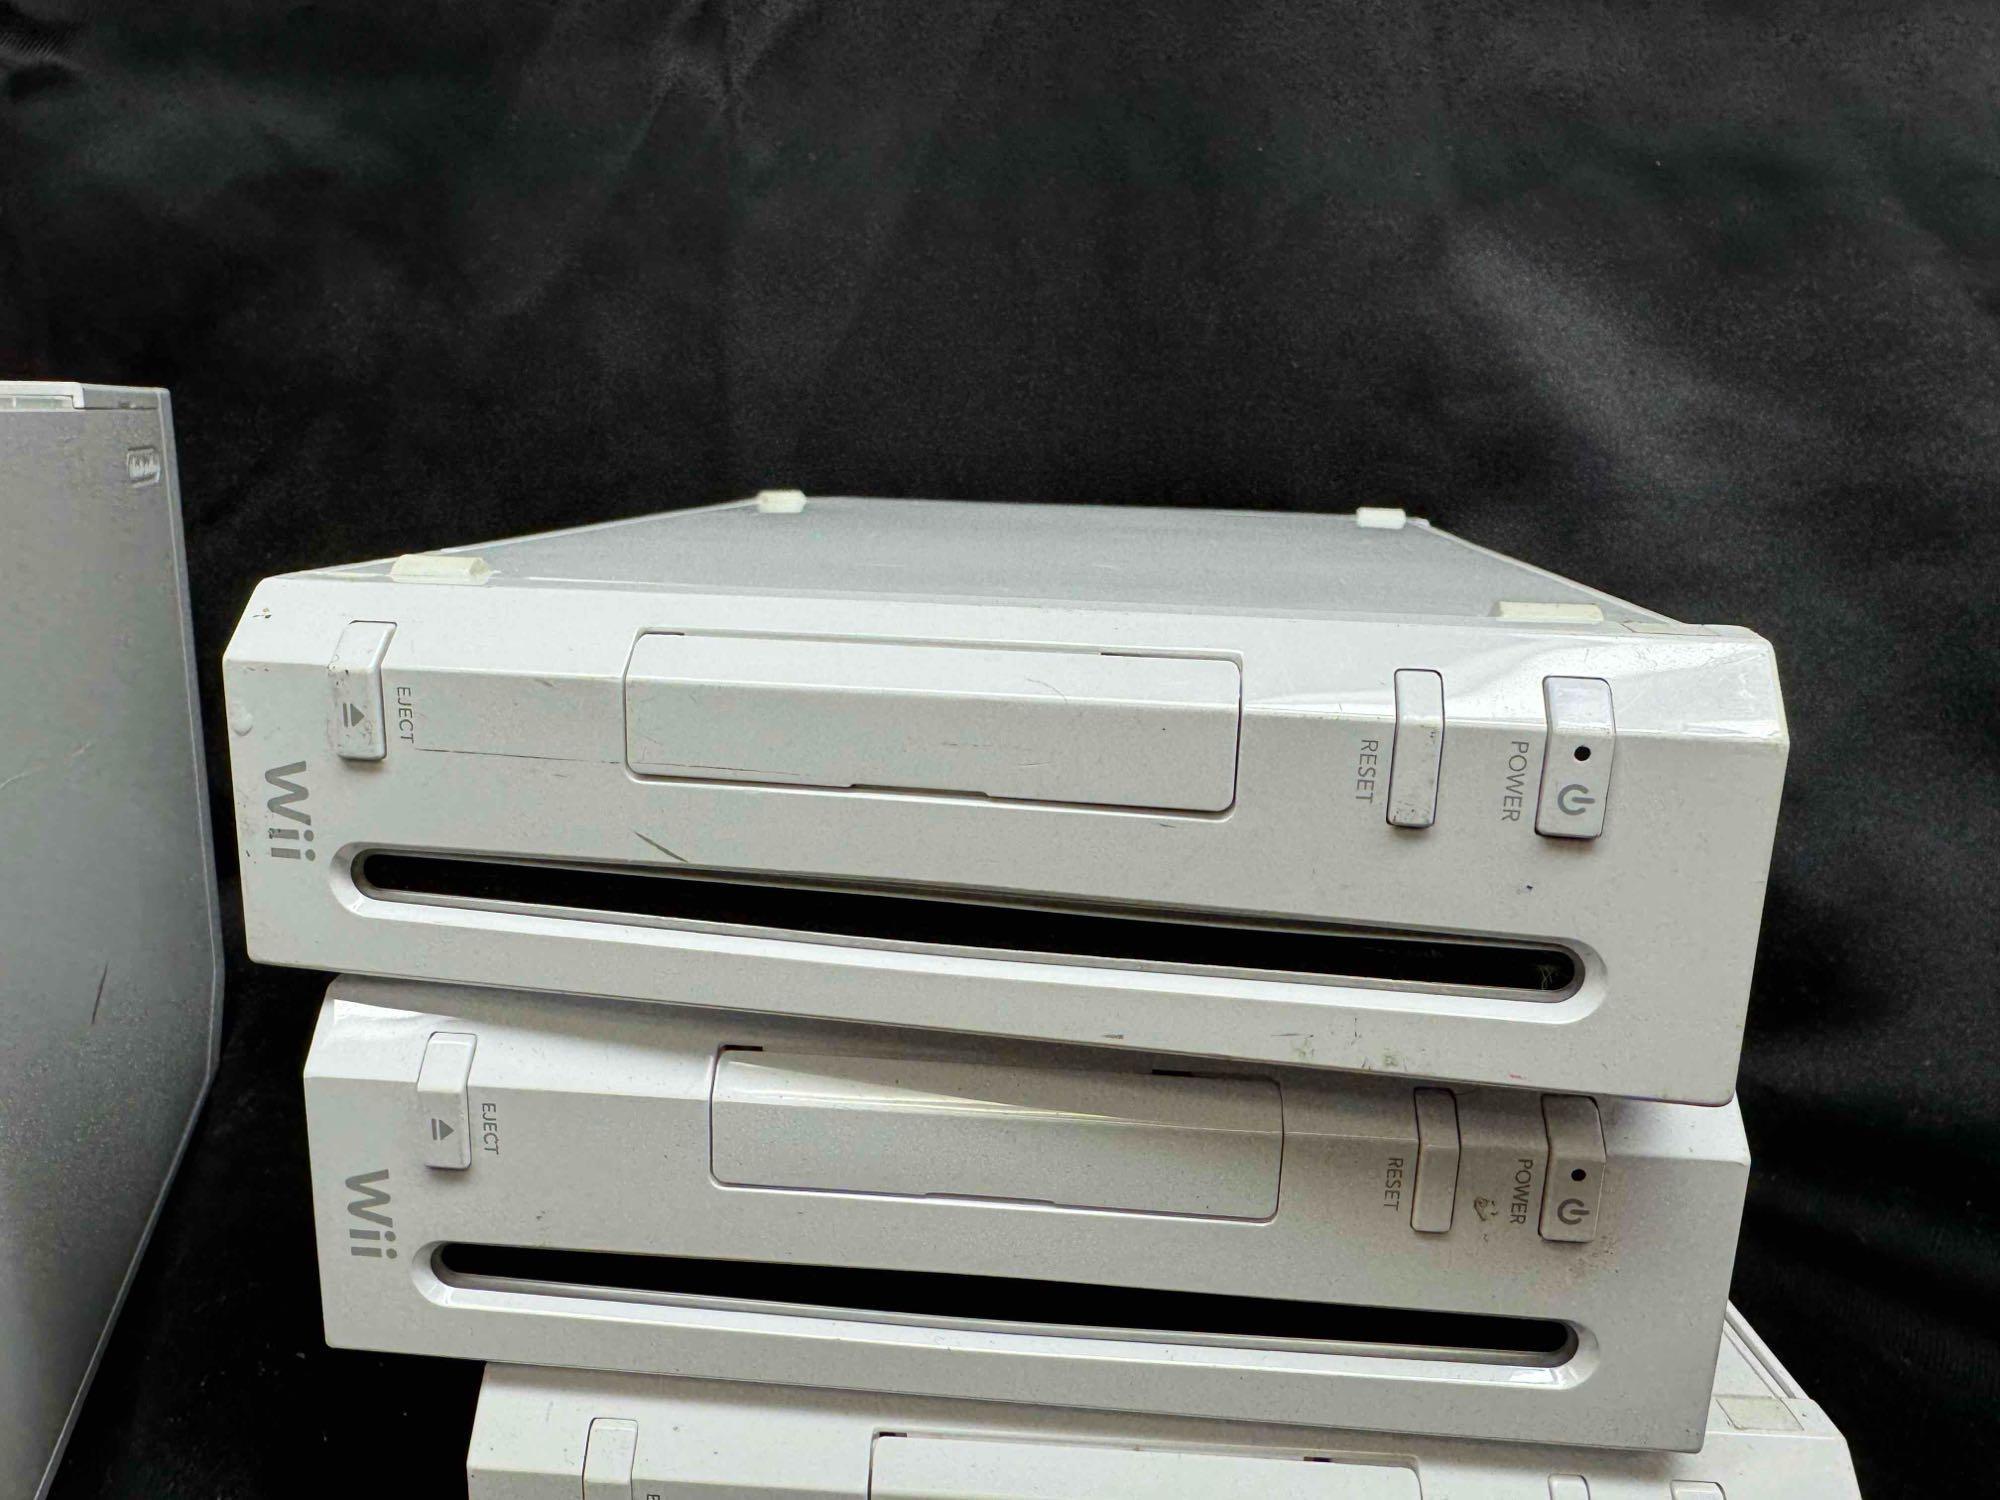 5 Nintendo Wii Video Game Systems